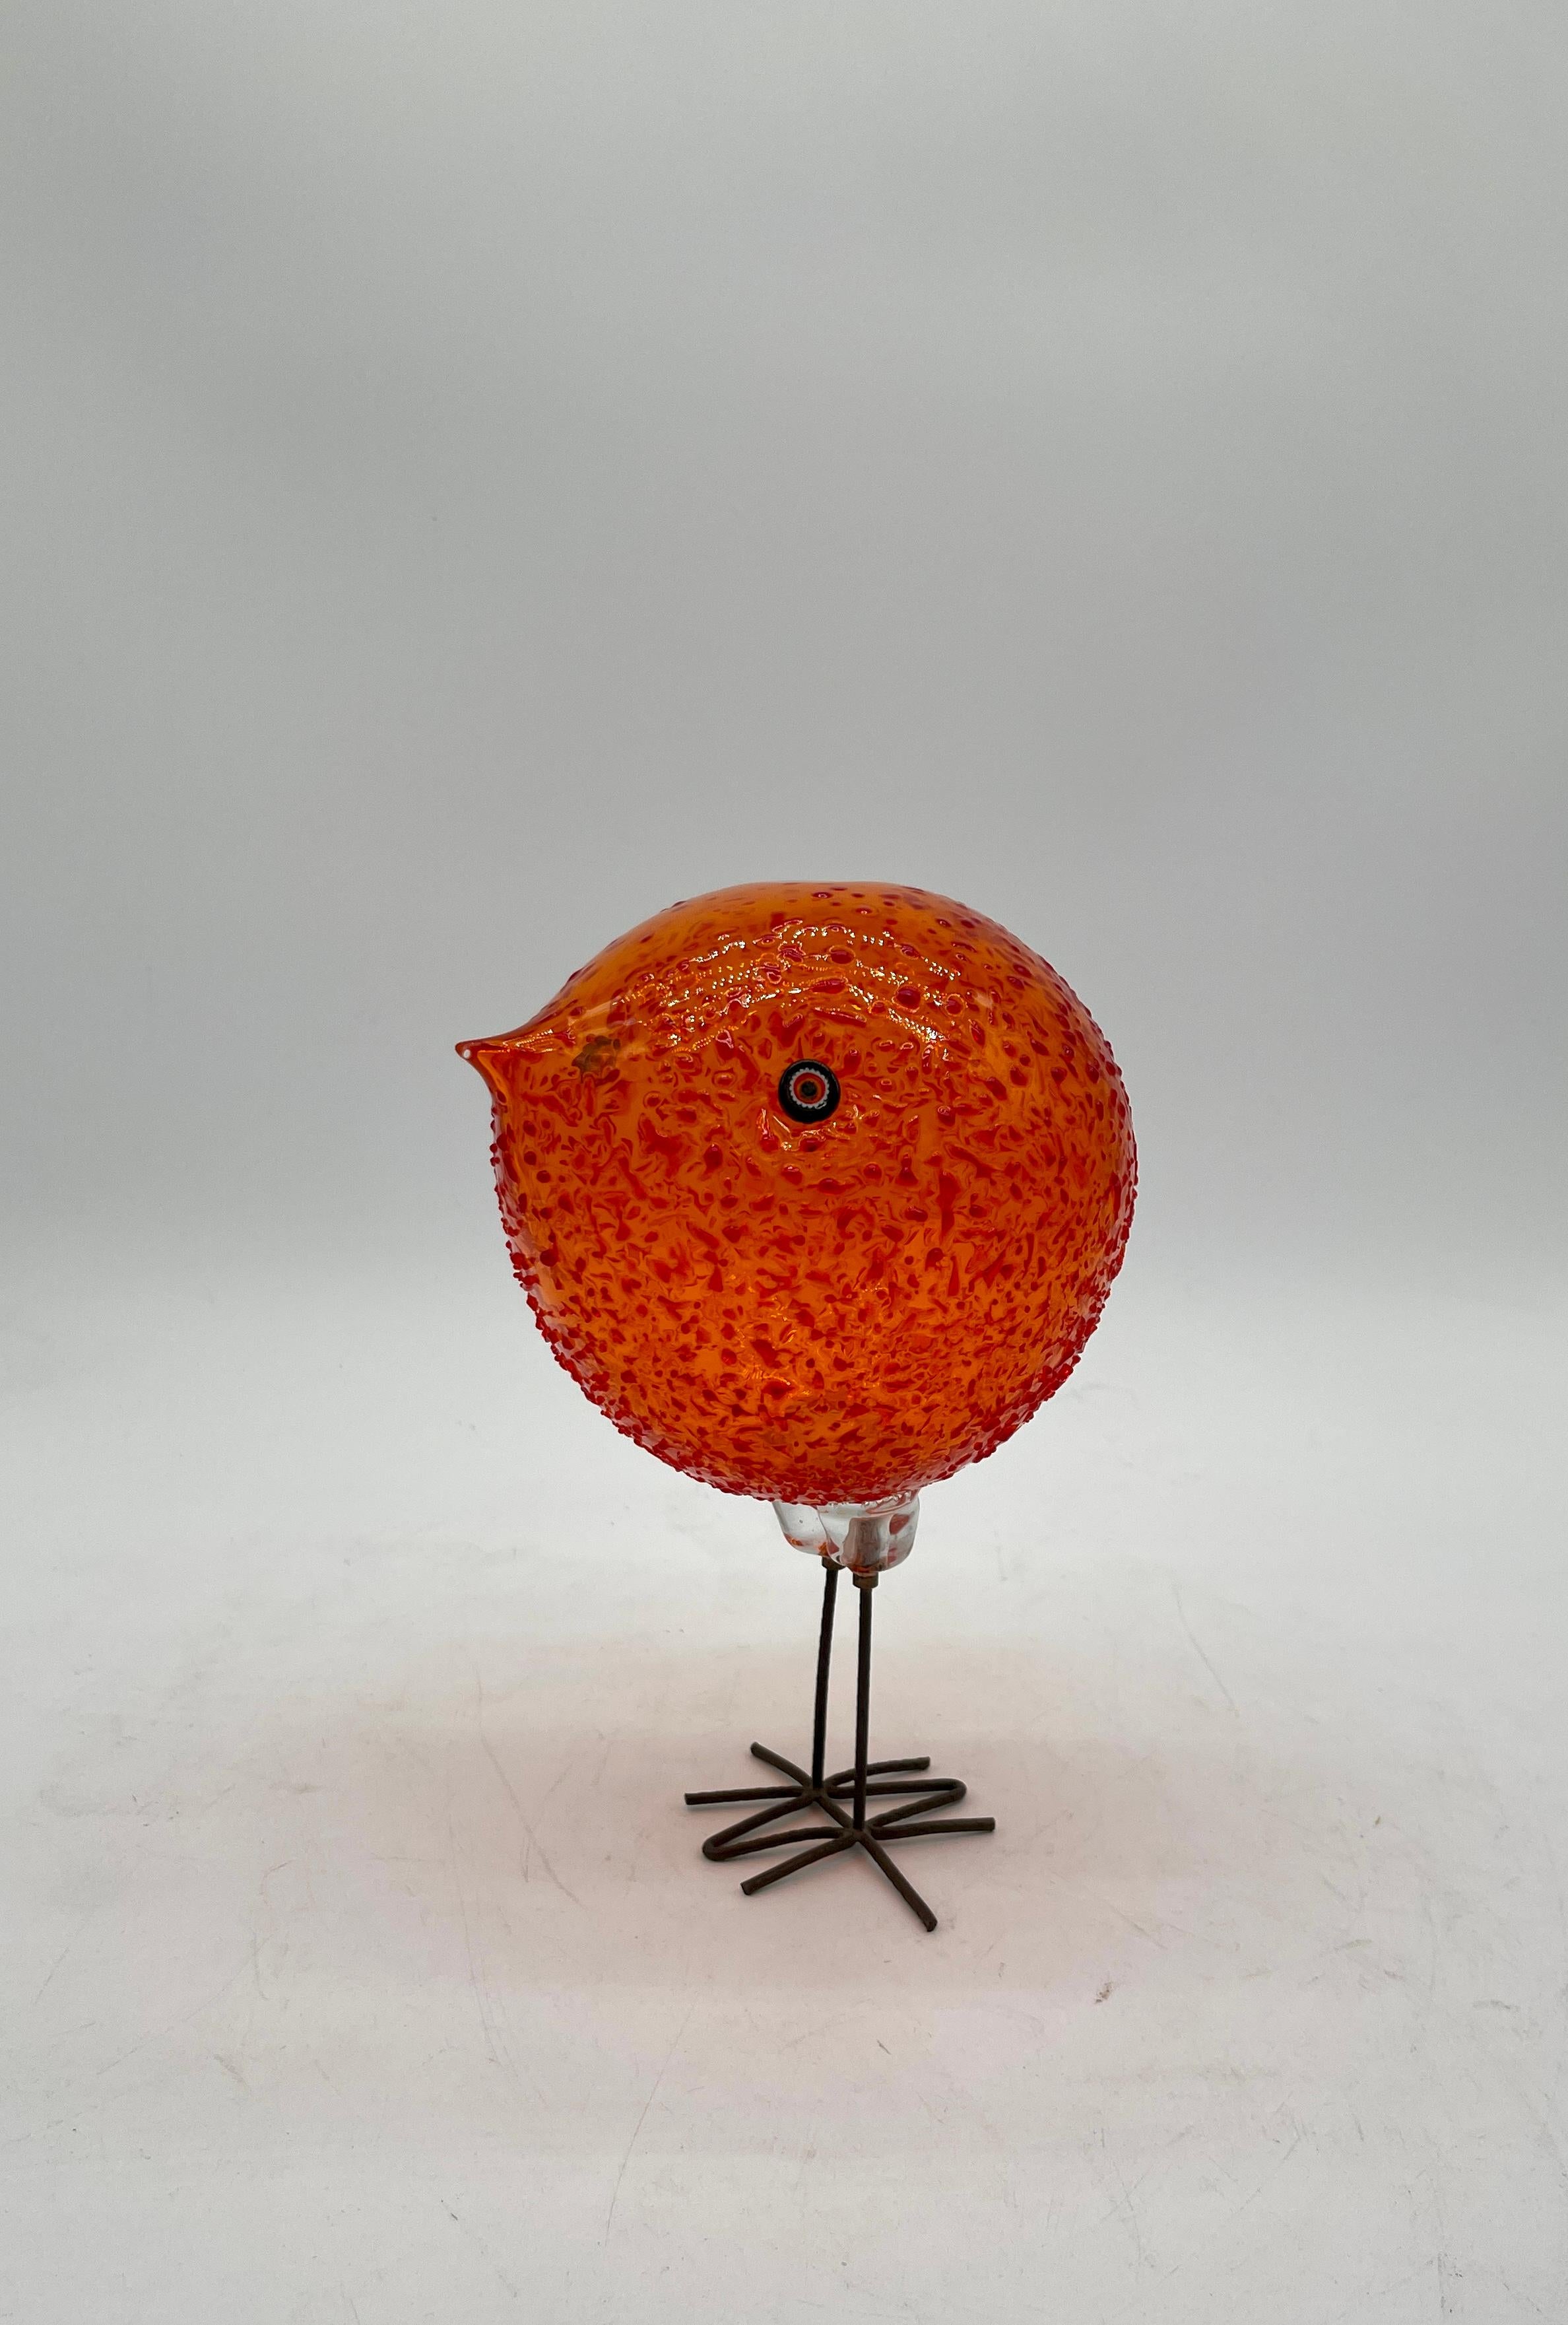 Great Alessandro Pianon for Vistosi Murano art glass bird. Iconic design.
Fine and good condition, free of any chips, cracks, or repairs
